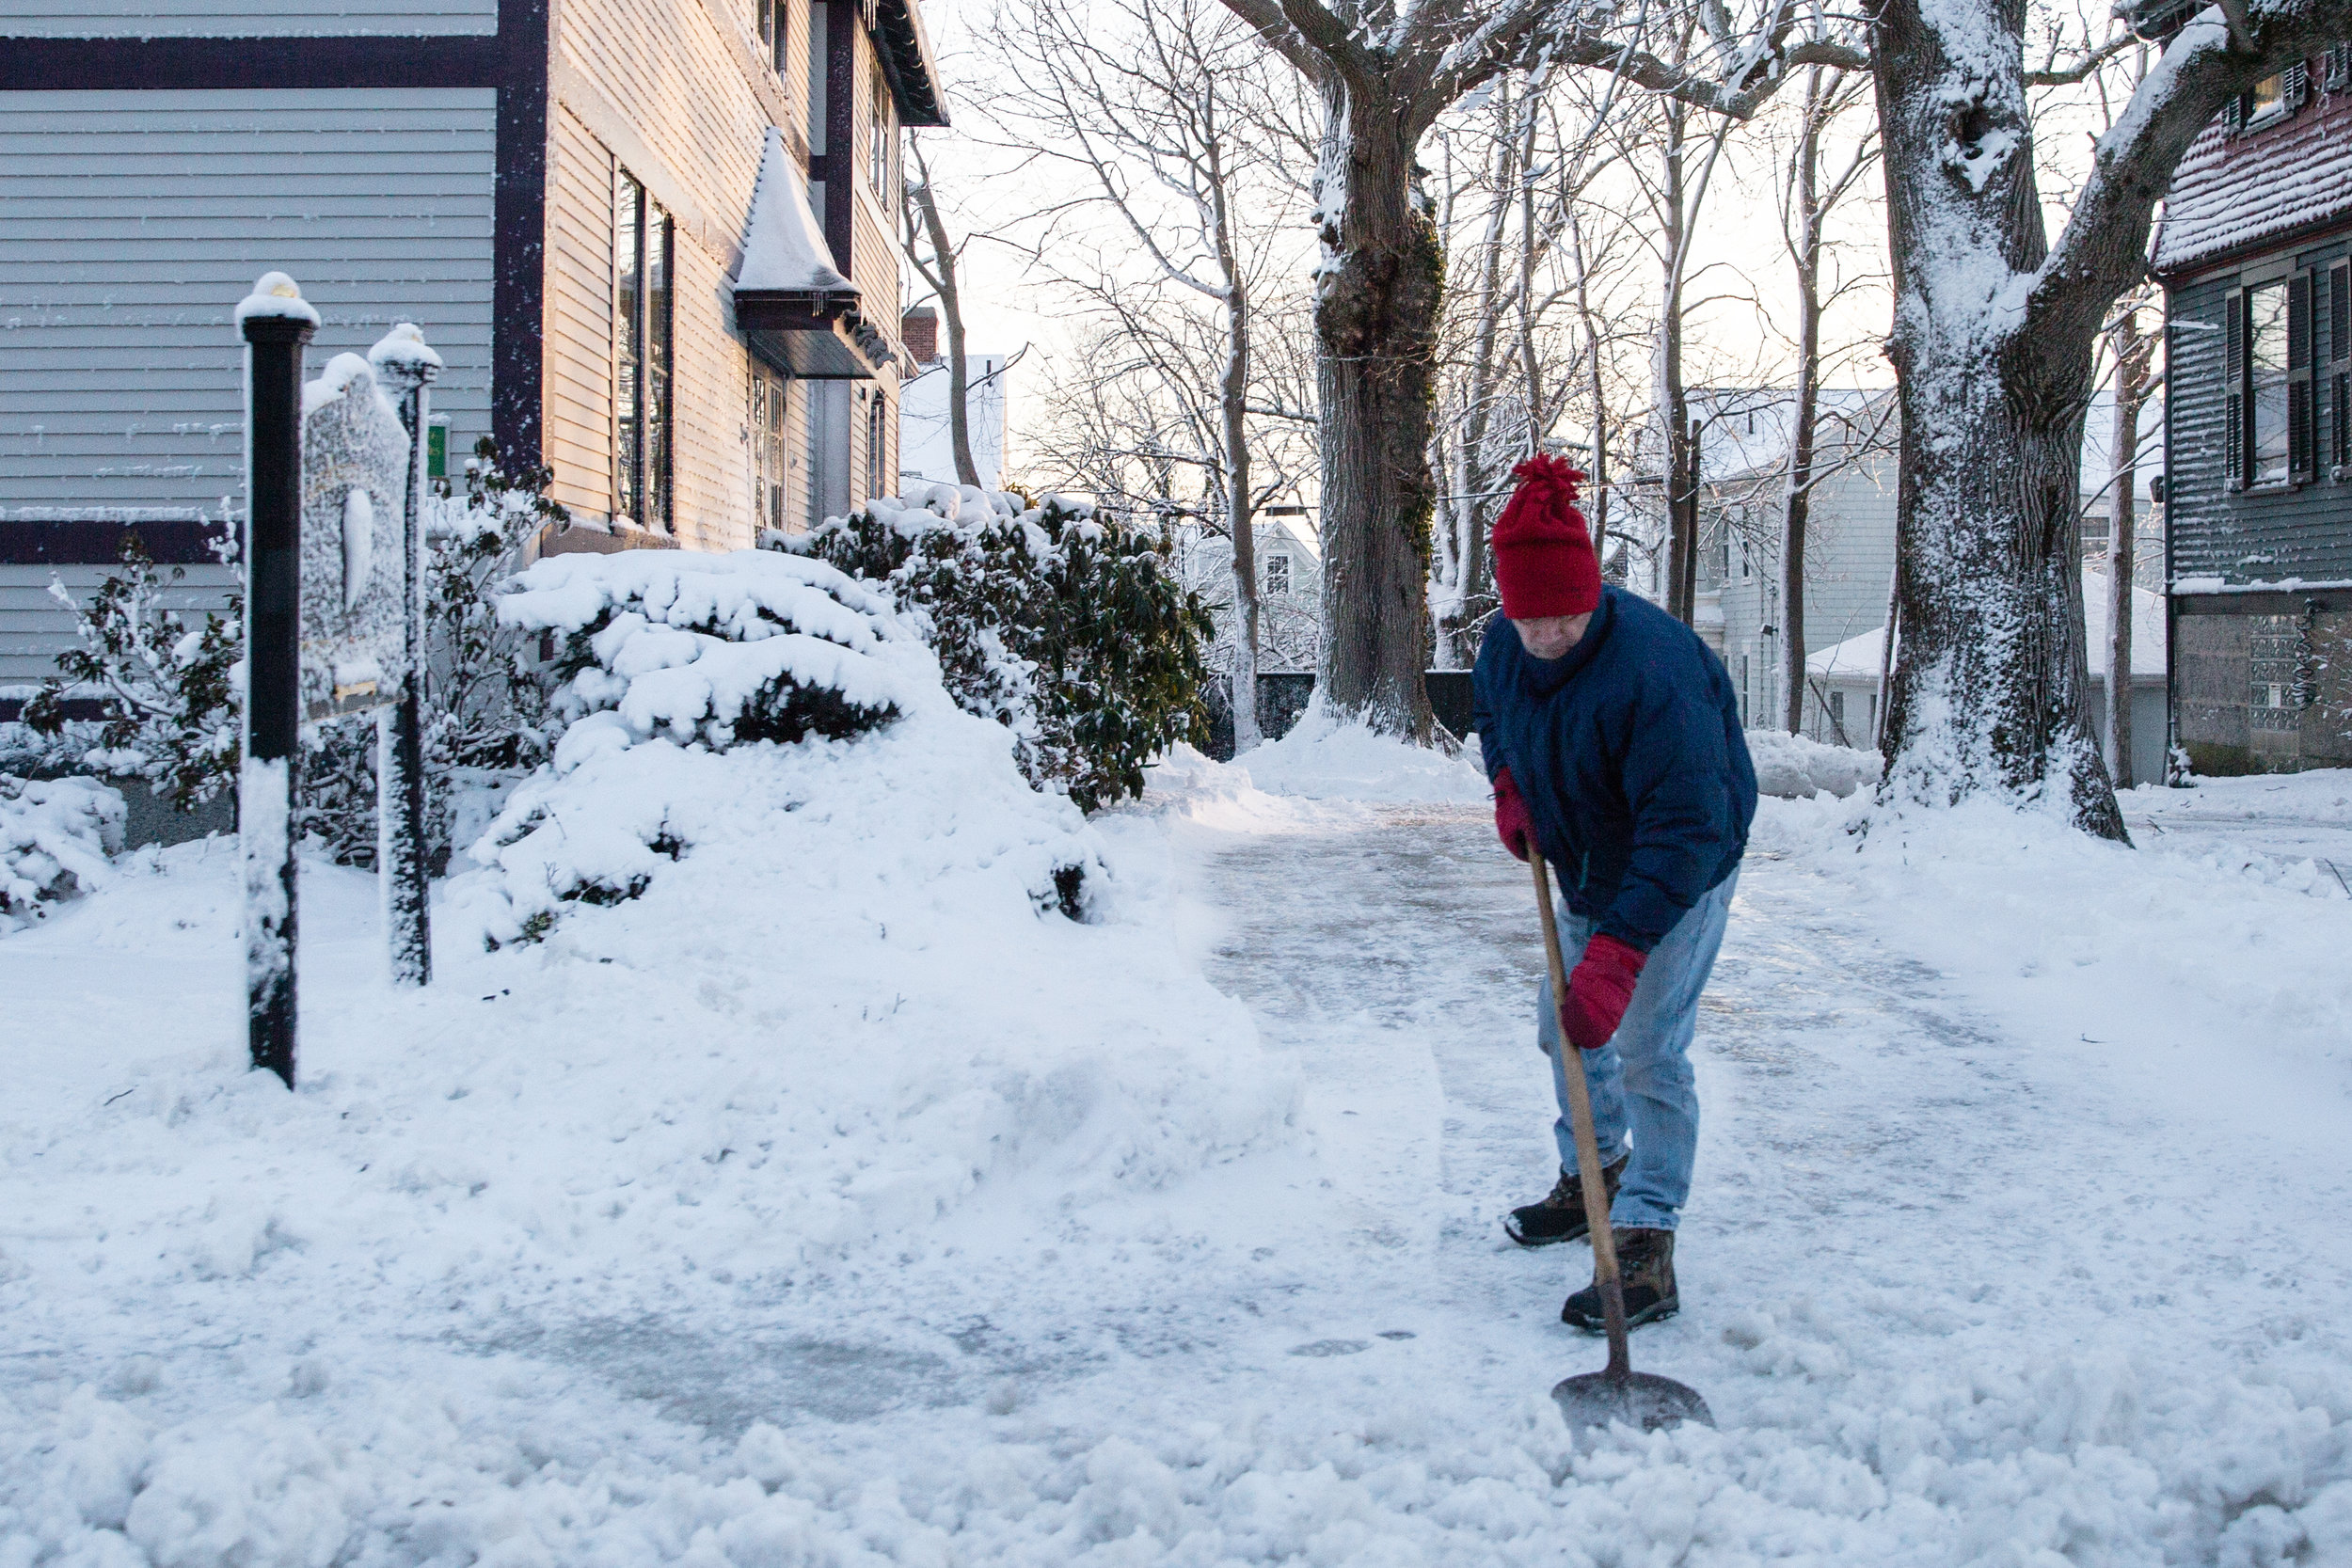  A man shovels snow after the storm. - Dartmouth, MA 